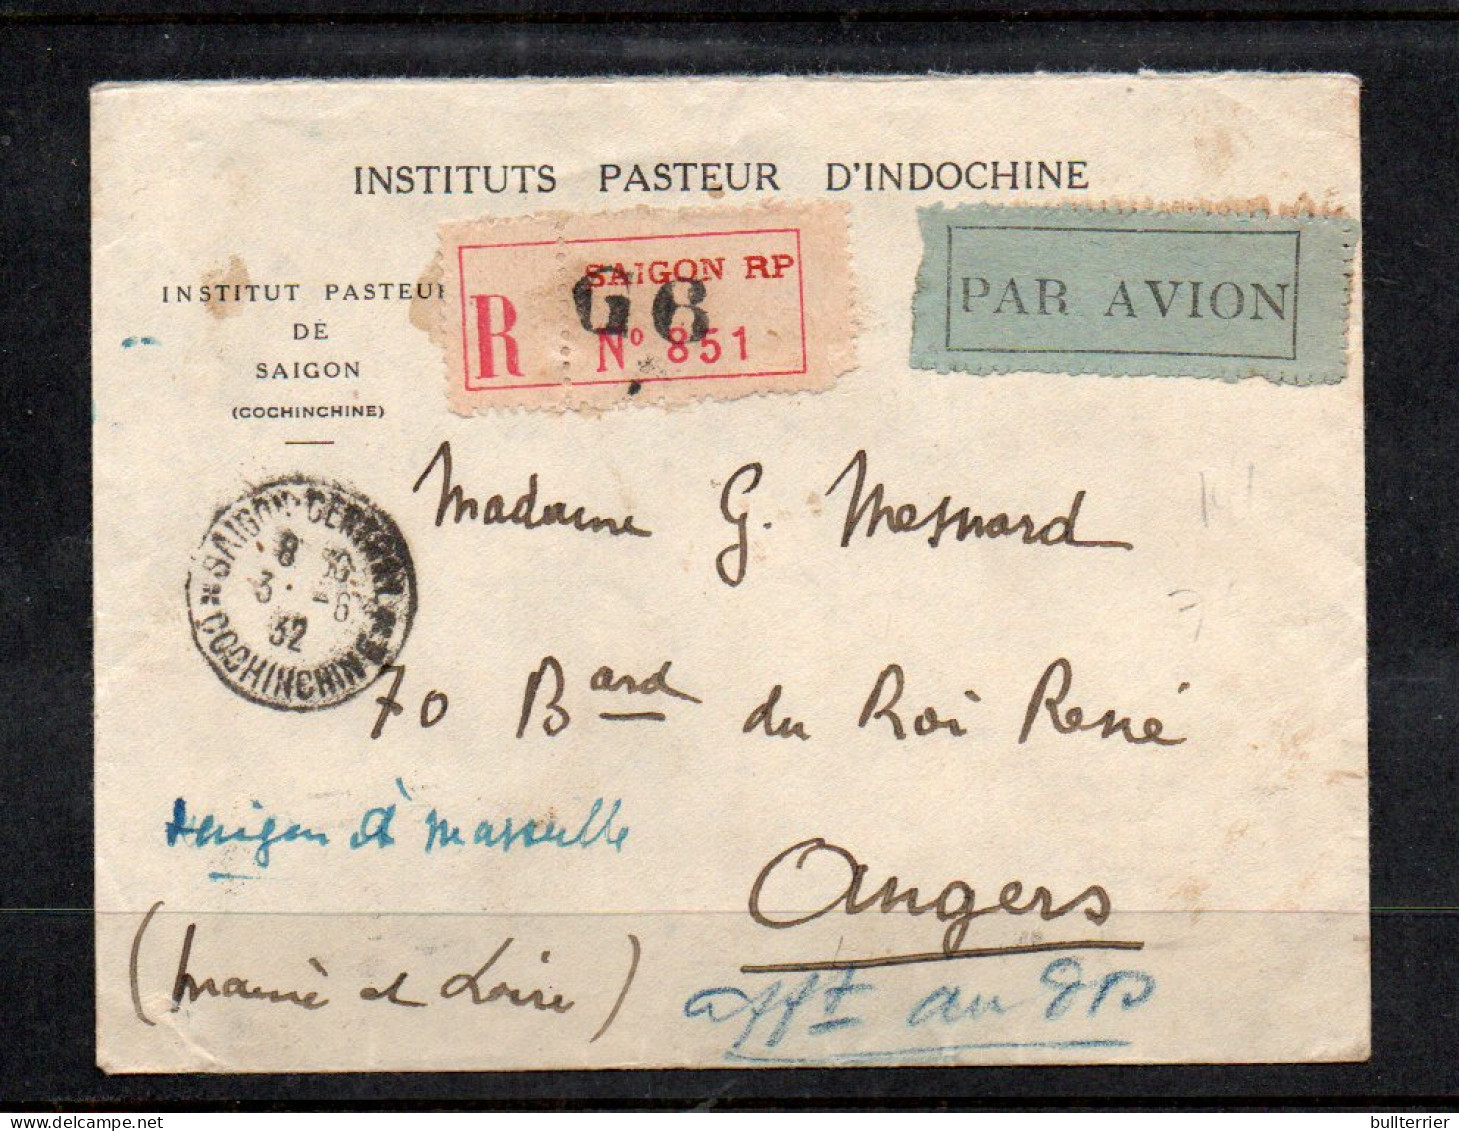 INDO CHINA - 1932 AIR ORIENT REG COVER FROM PASTUER INSTITUE SIAGON TO ANGERS FRANCE  - Luftpost